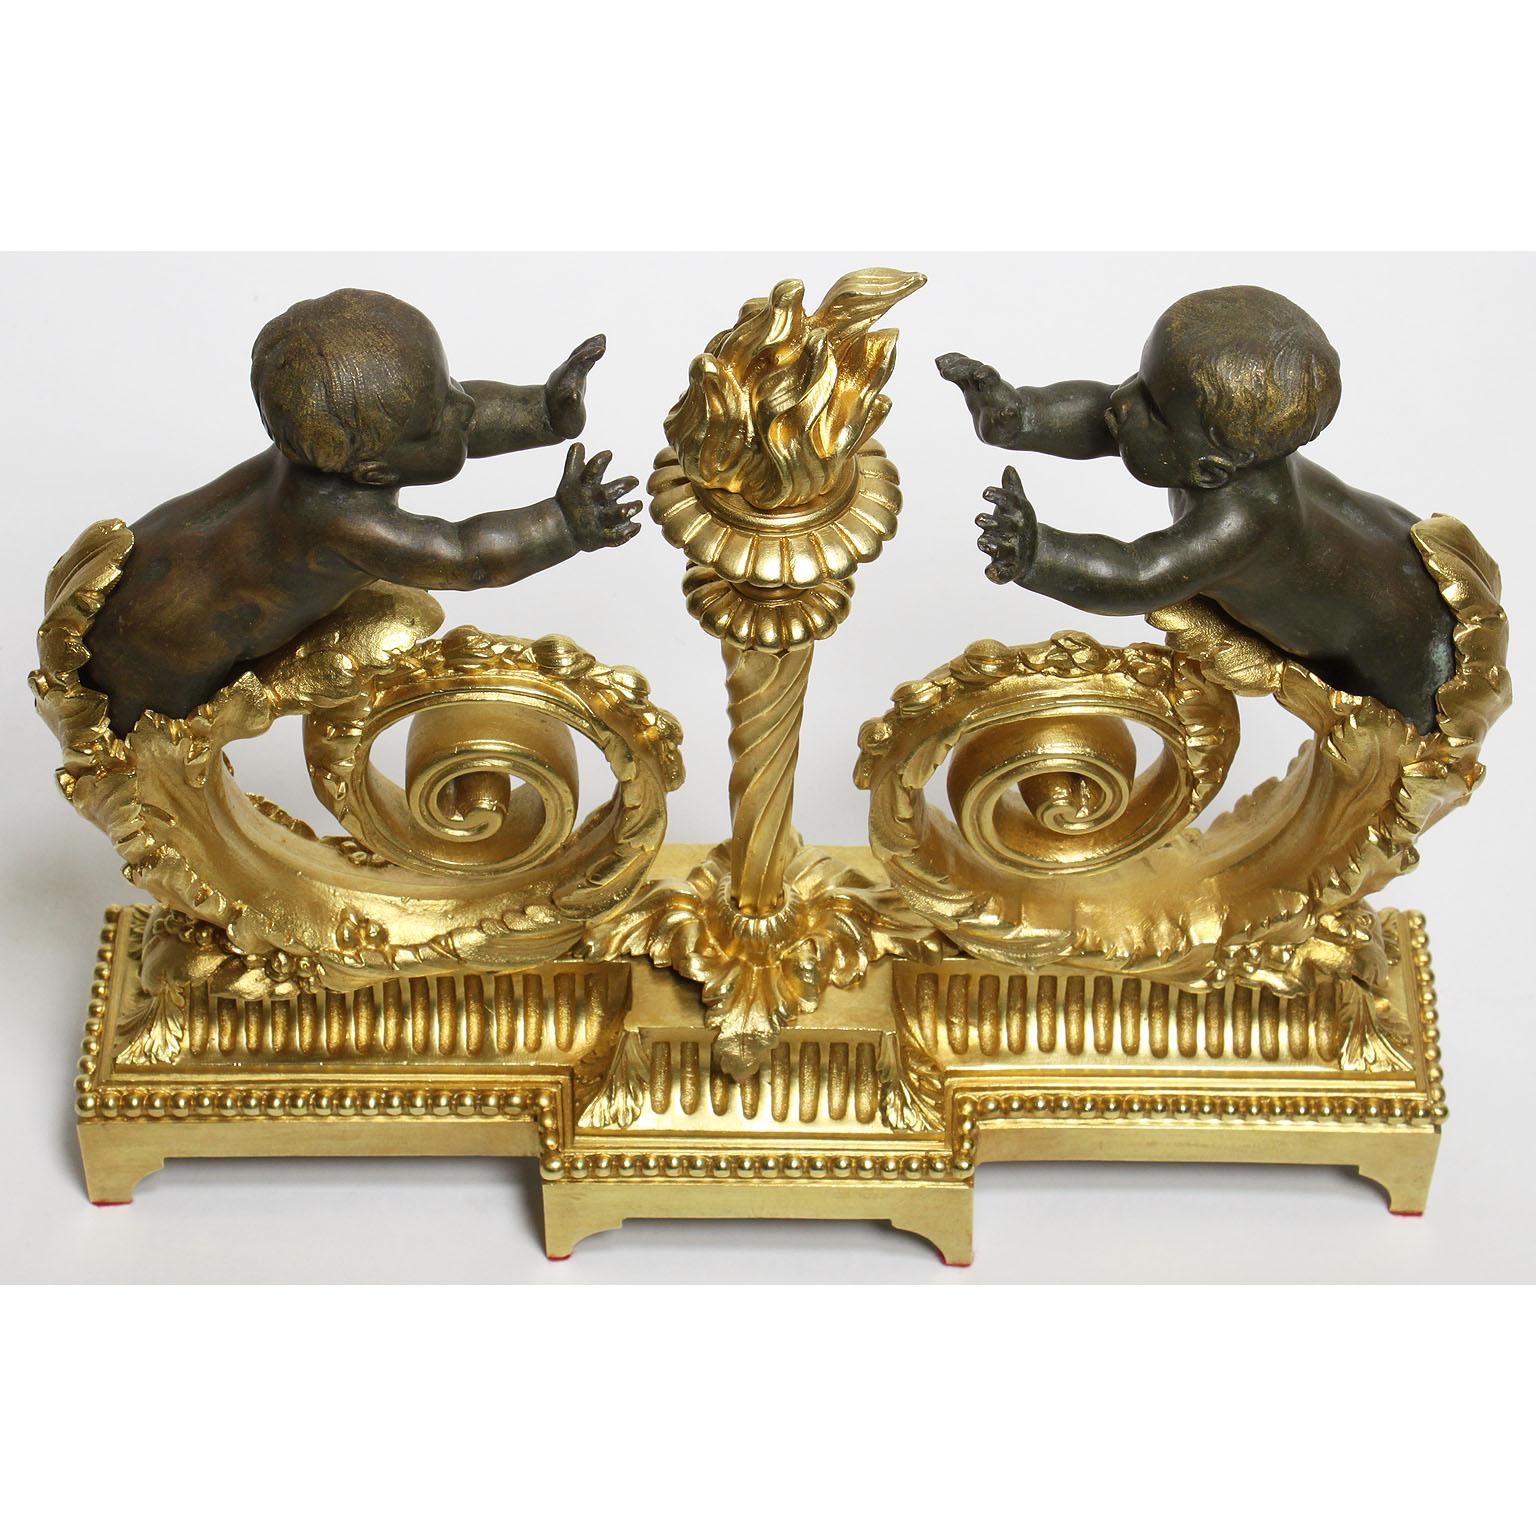 Early 20th Century French 19th-20th Century Louis XV Style Gilt Bronze Putti Children Chenet, Pair For Sale